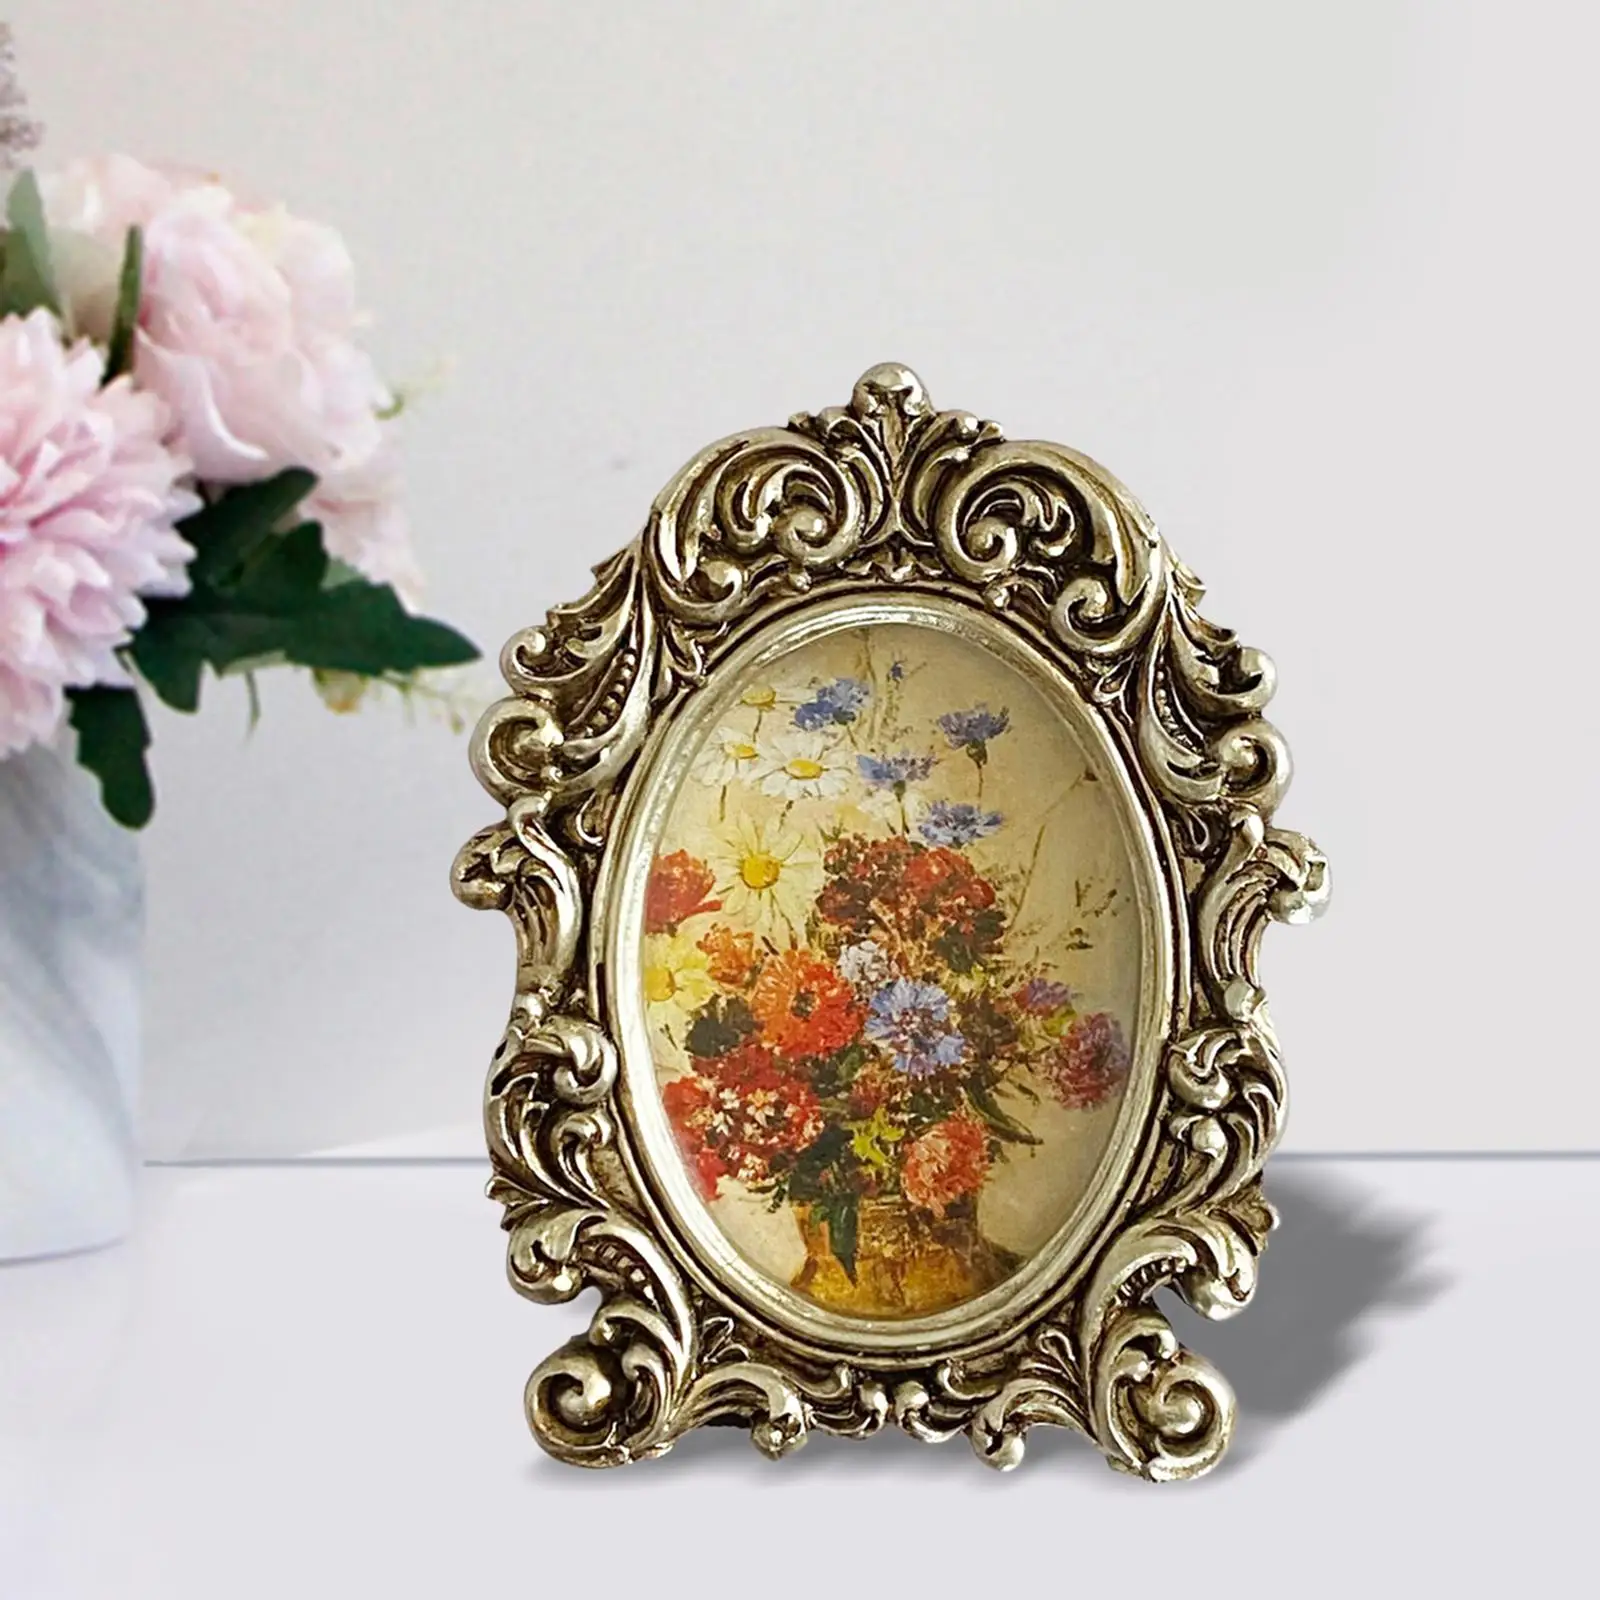 Country Style Photo Frame Picture Holder Ornate Desktop Picture Frame for Apartment Office Table Centerpiece Bedroom Decoration